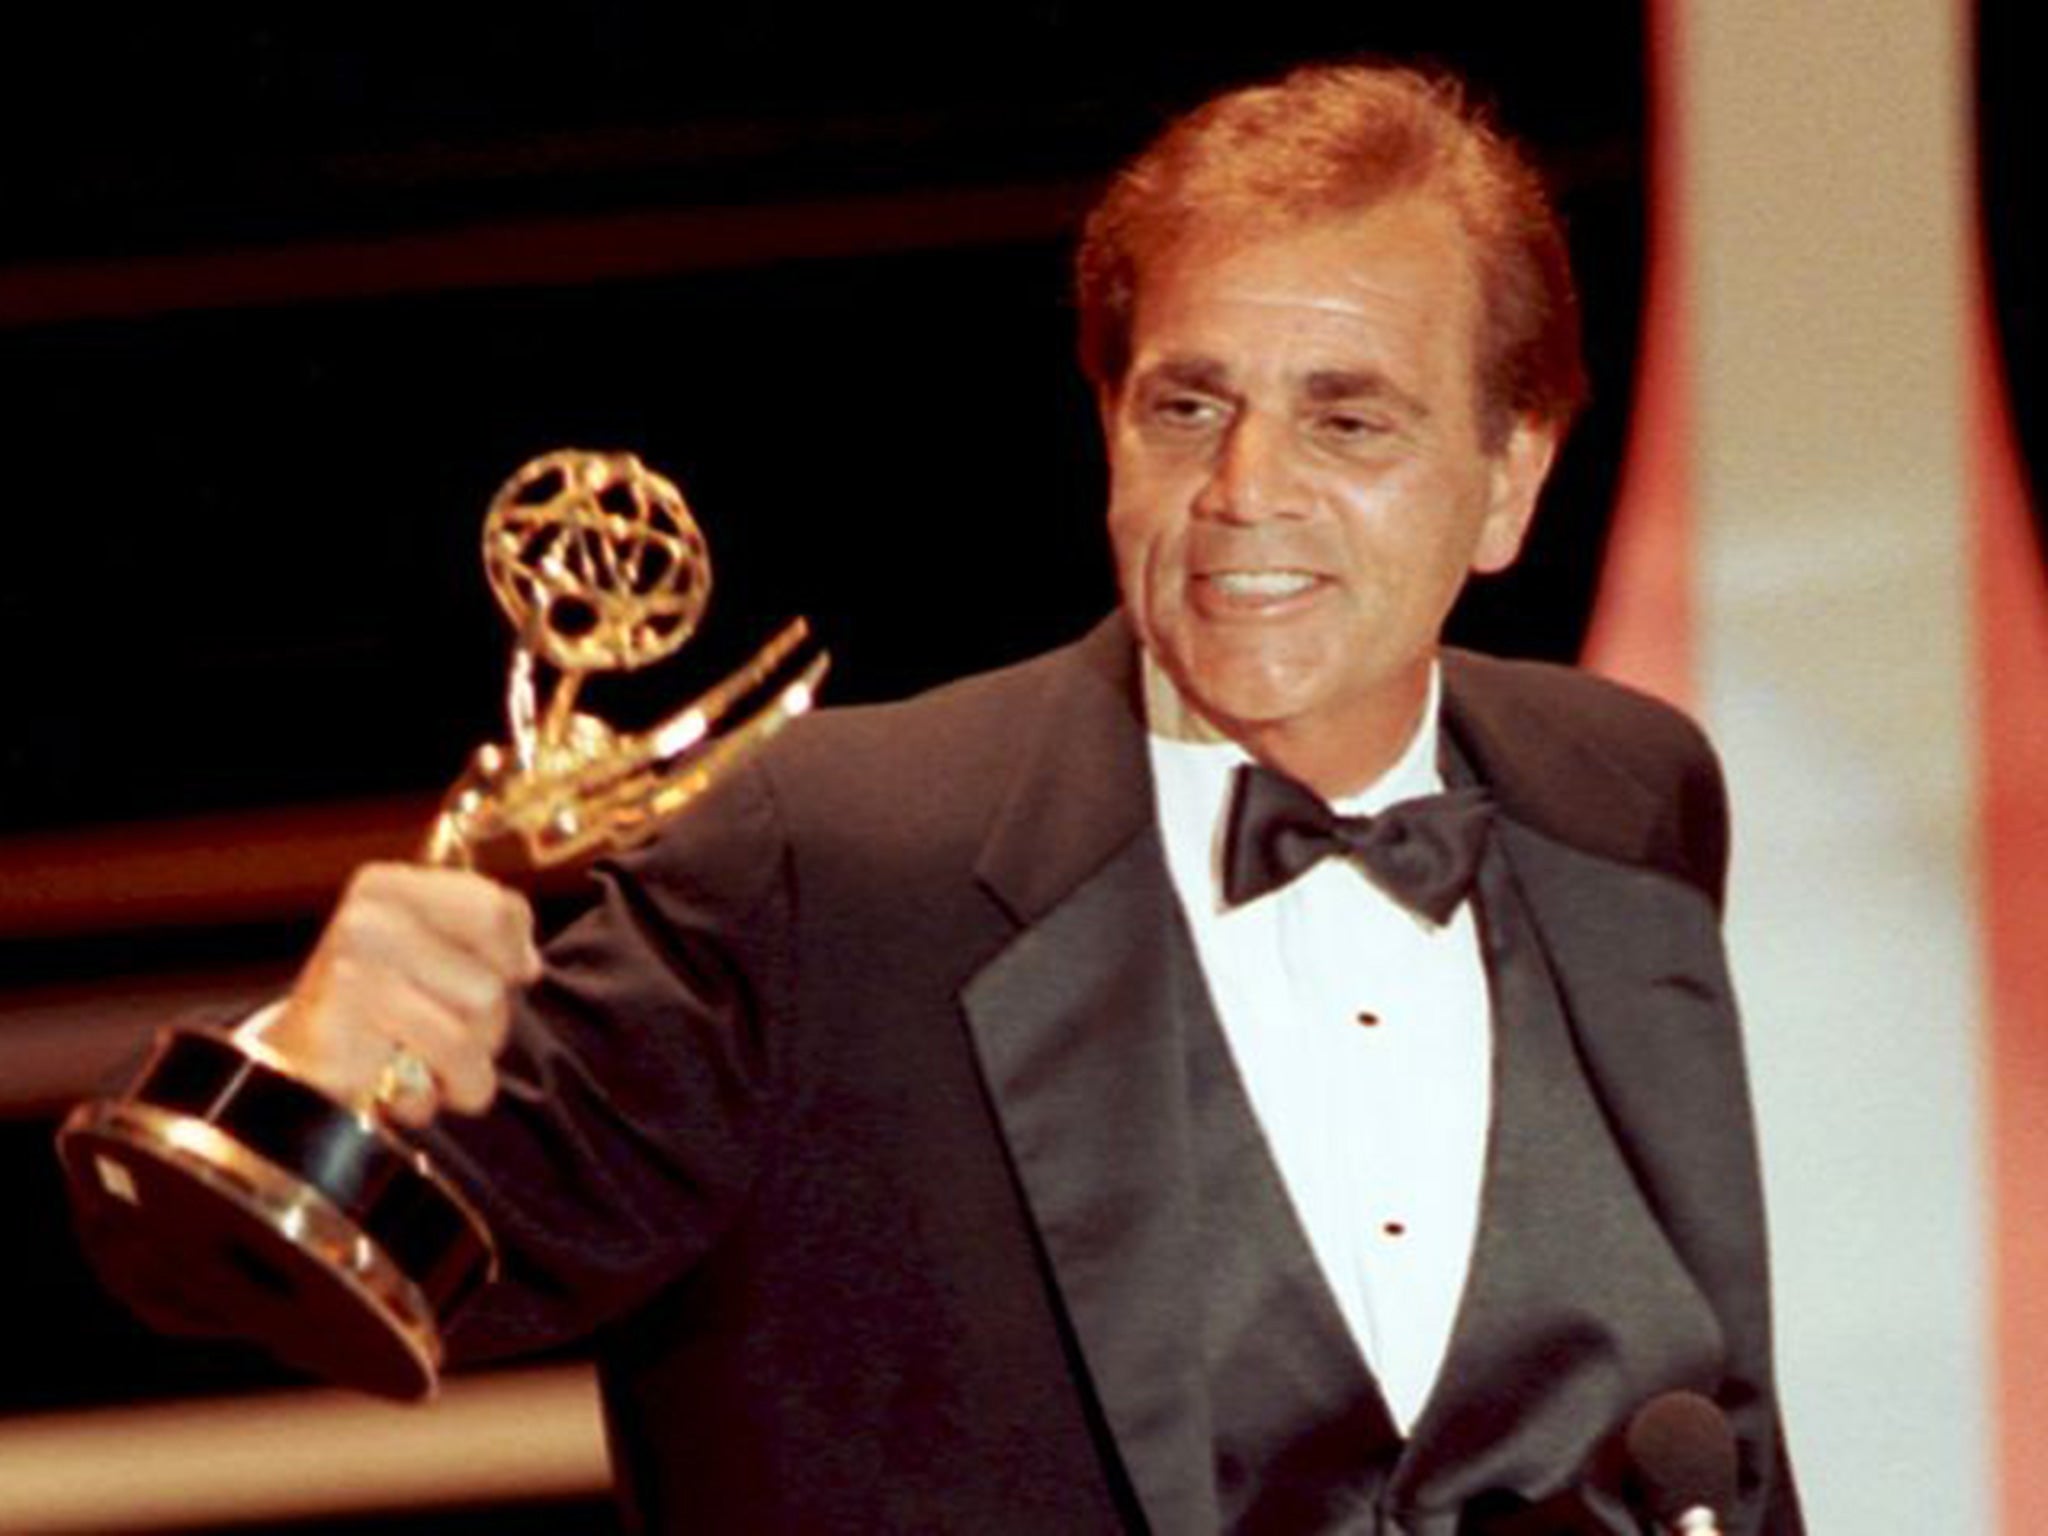 Actor Alex Rocco holds up his Emmy award for best supporting actor in a television comedy series for his role in The Famous Teddy Z in 1990